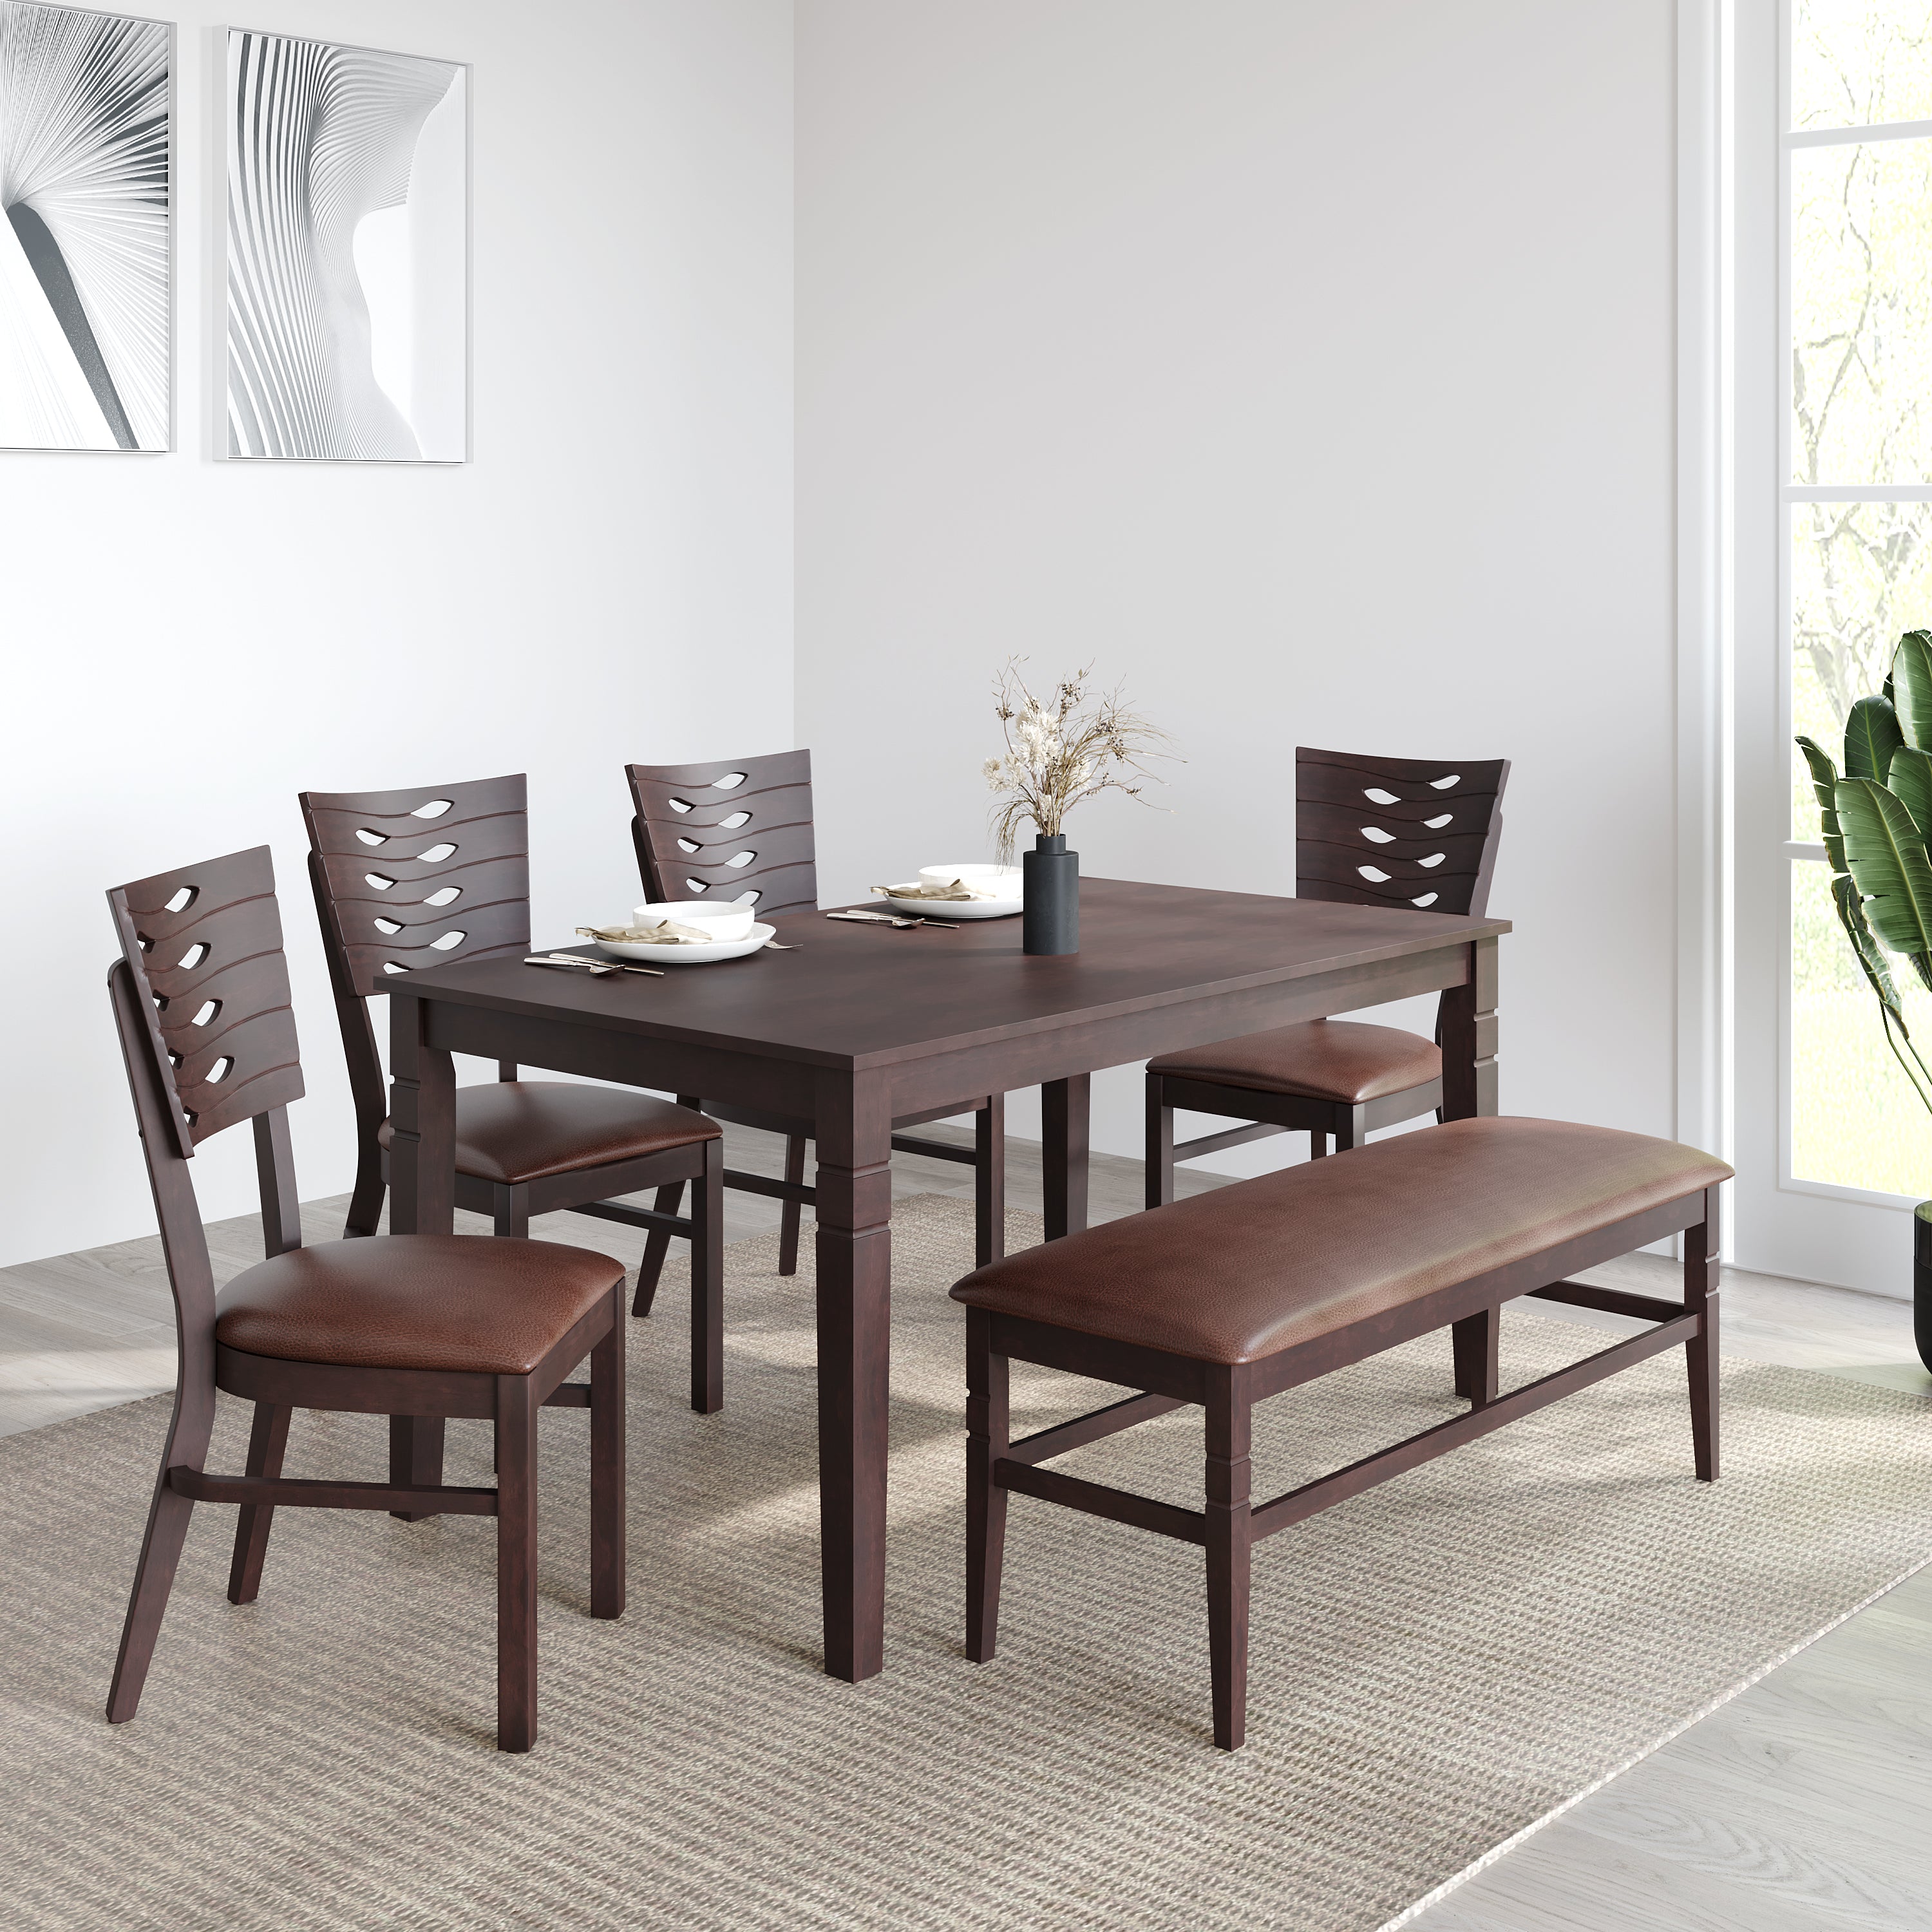 Fern 6 Seater Dining Set With Bench (Erin Brown)